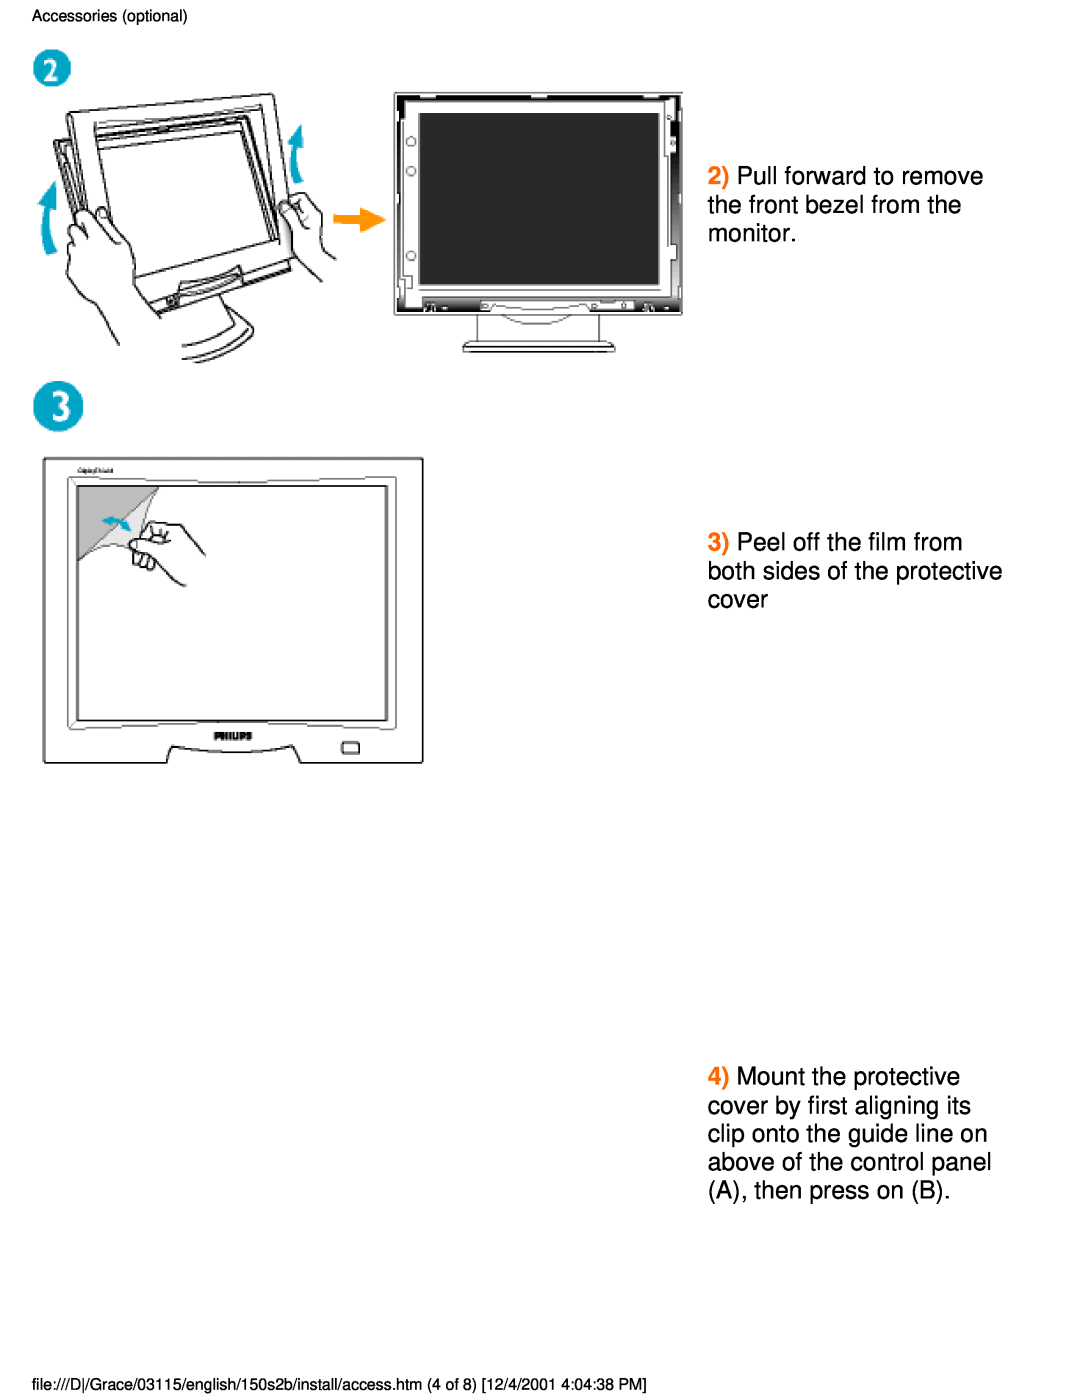 Philips 150S2B user manual Pull forward to remove the front bezel from the monitor, Accessories optional 